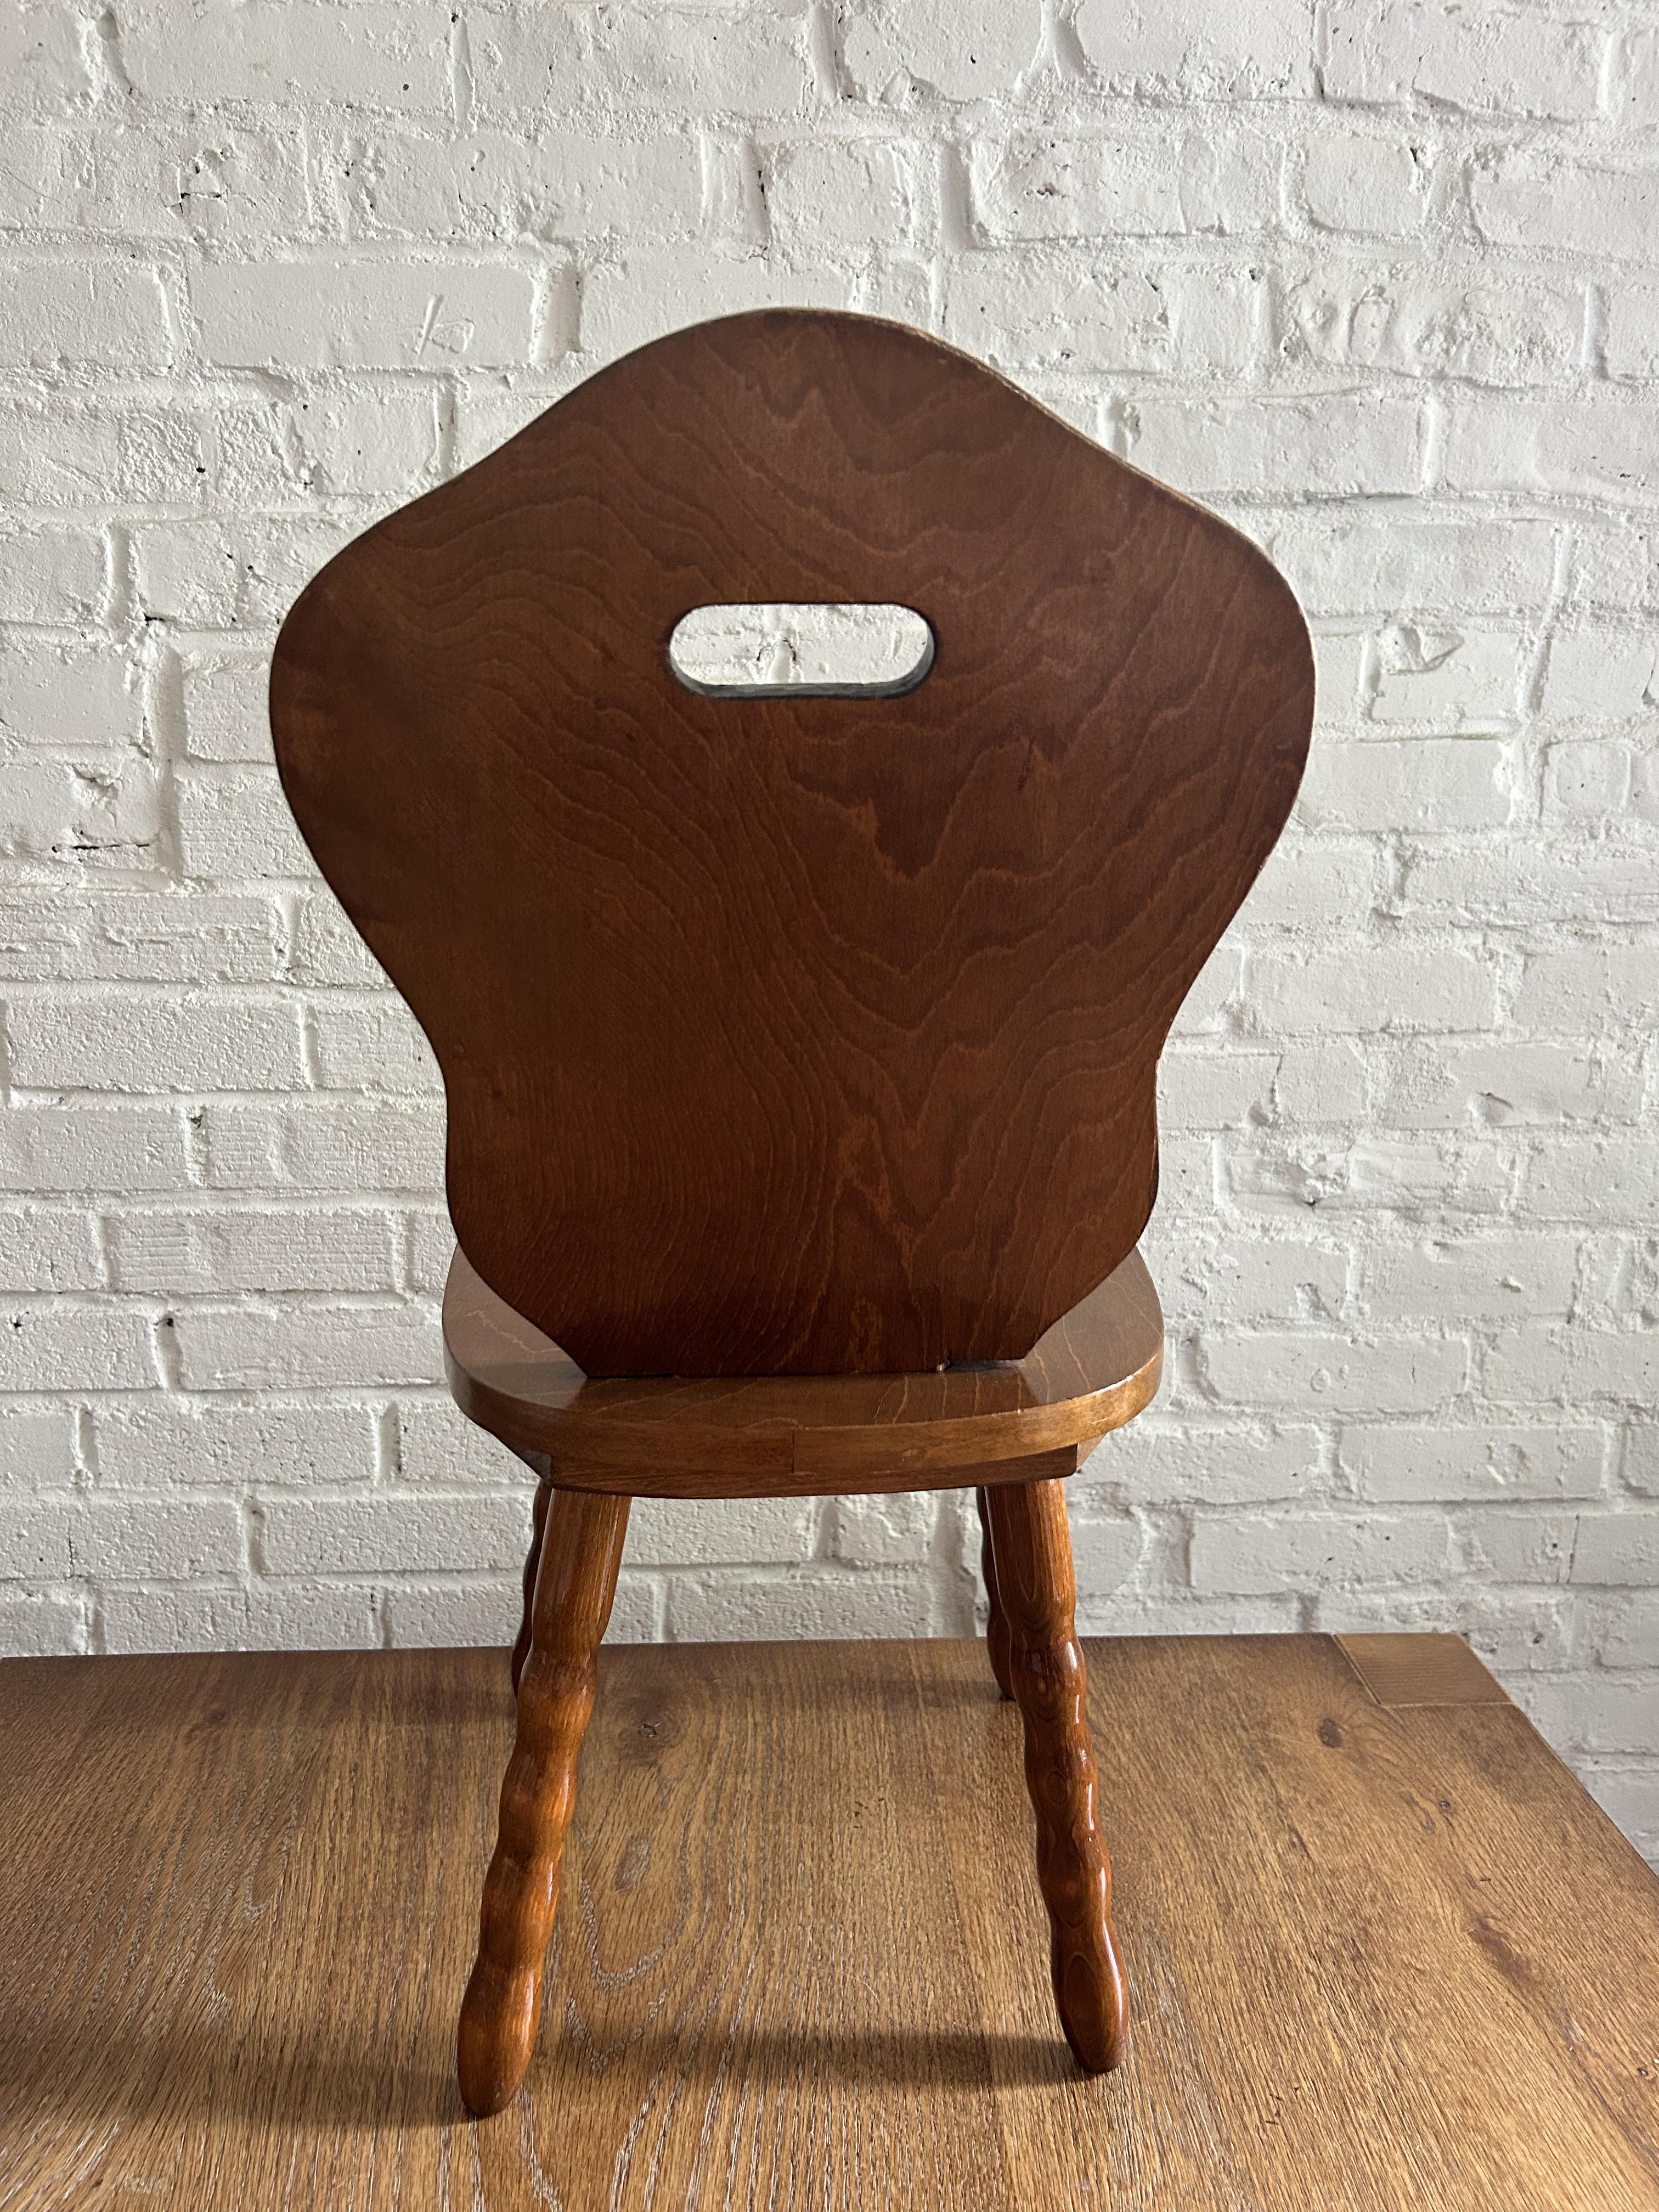 Adorable solid wood children's chairs. Features a carved solid back and seat atop four turned legs. While originally a children's chair, they would be best now as a decorative stool in a living room, entry way, bedroom or bathroom. The solid wood is